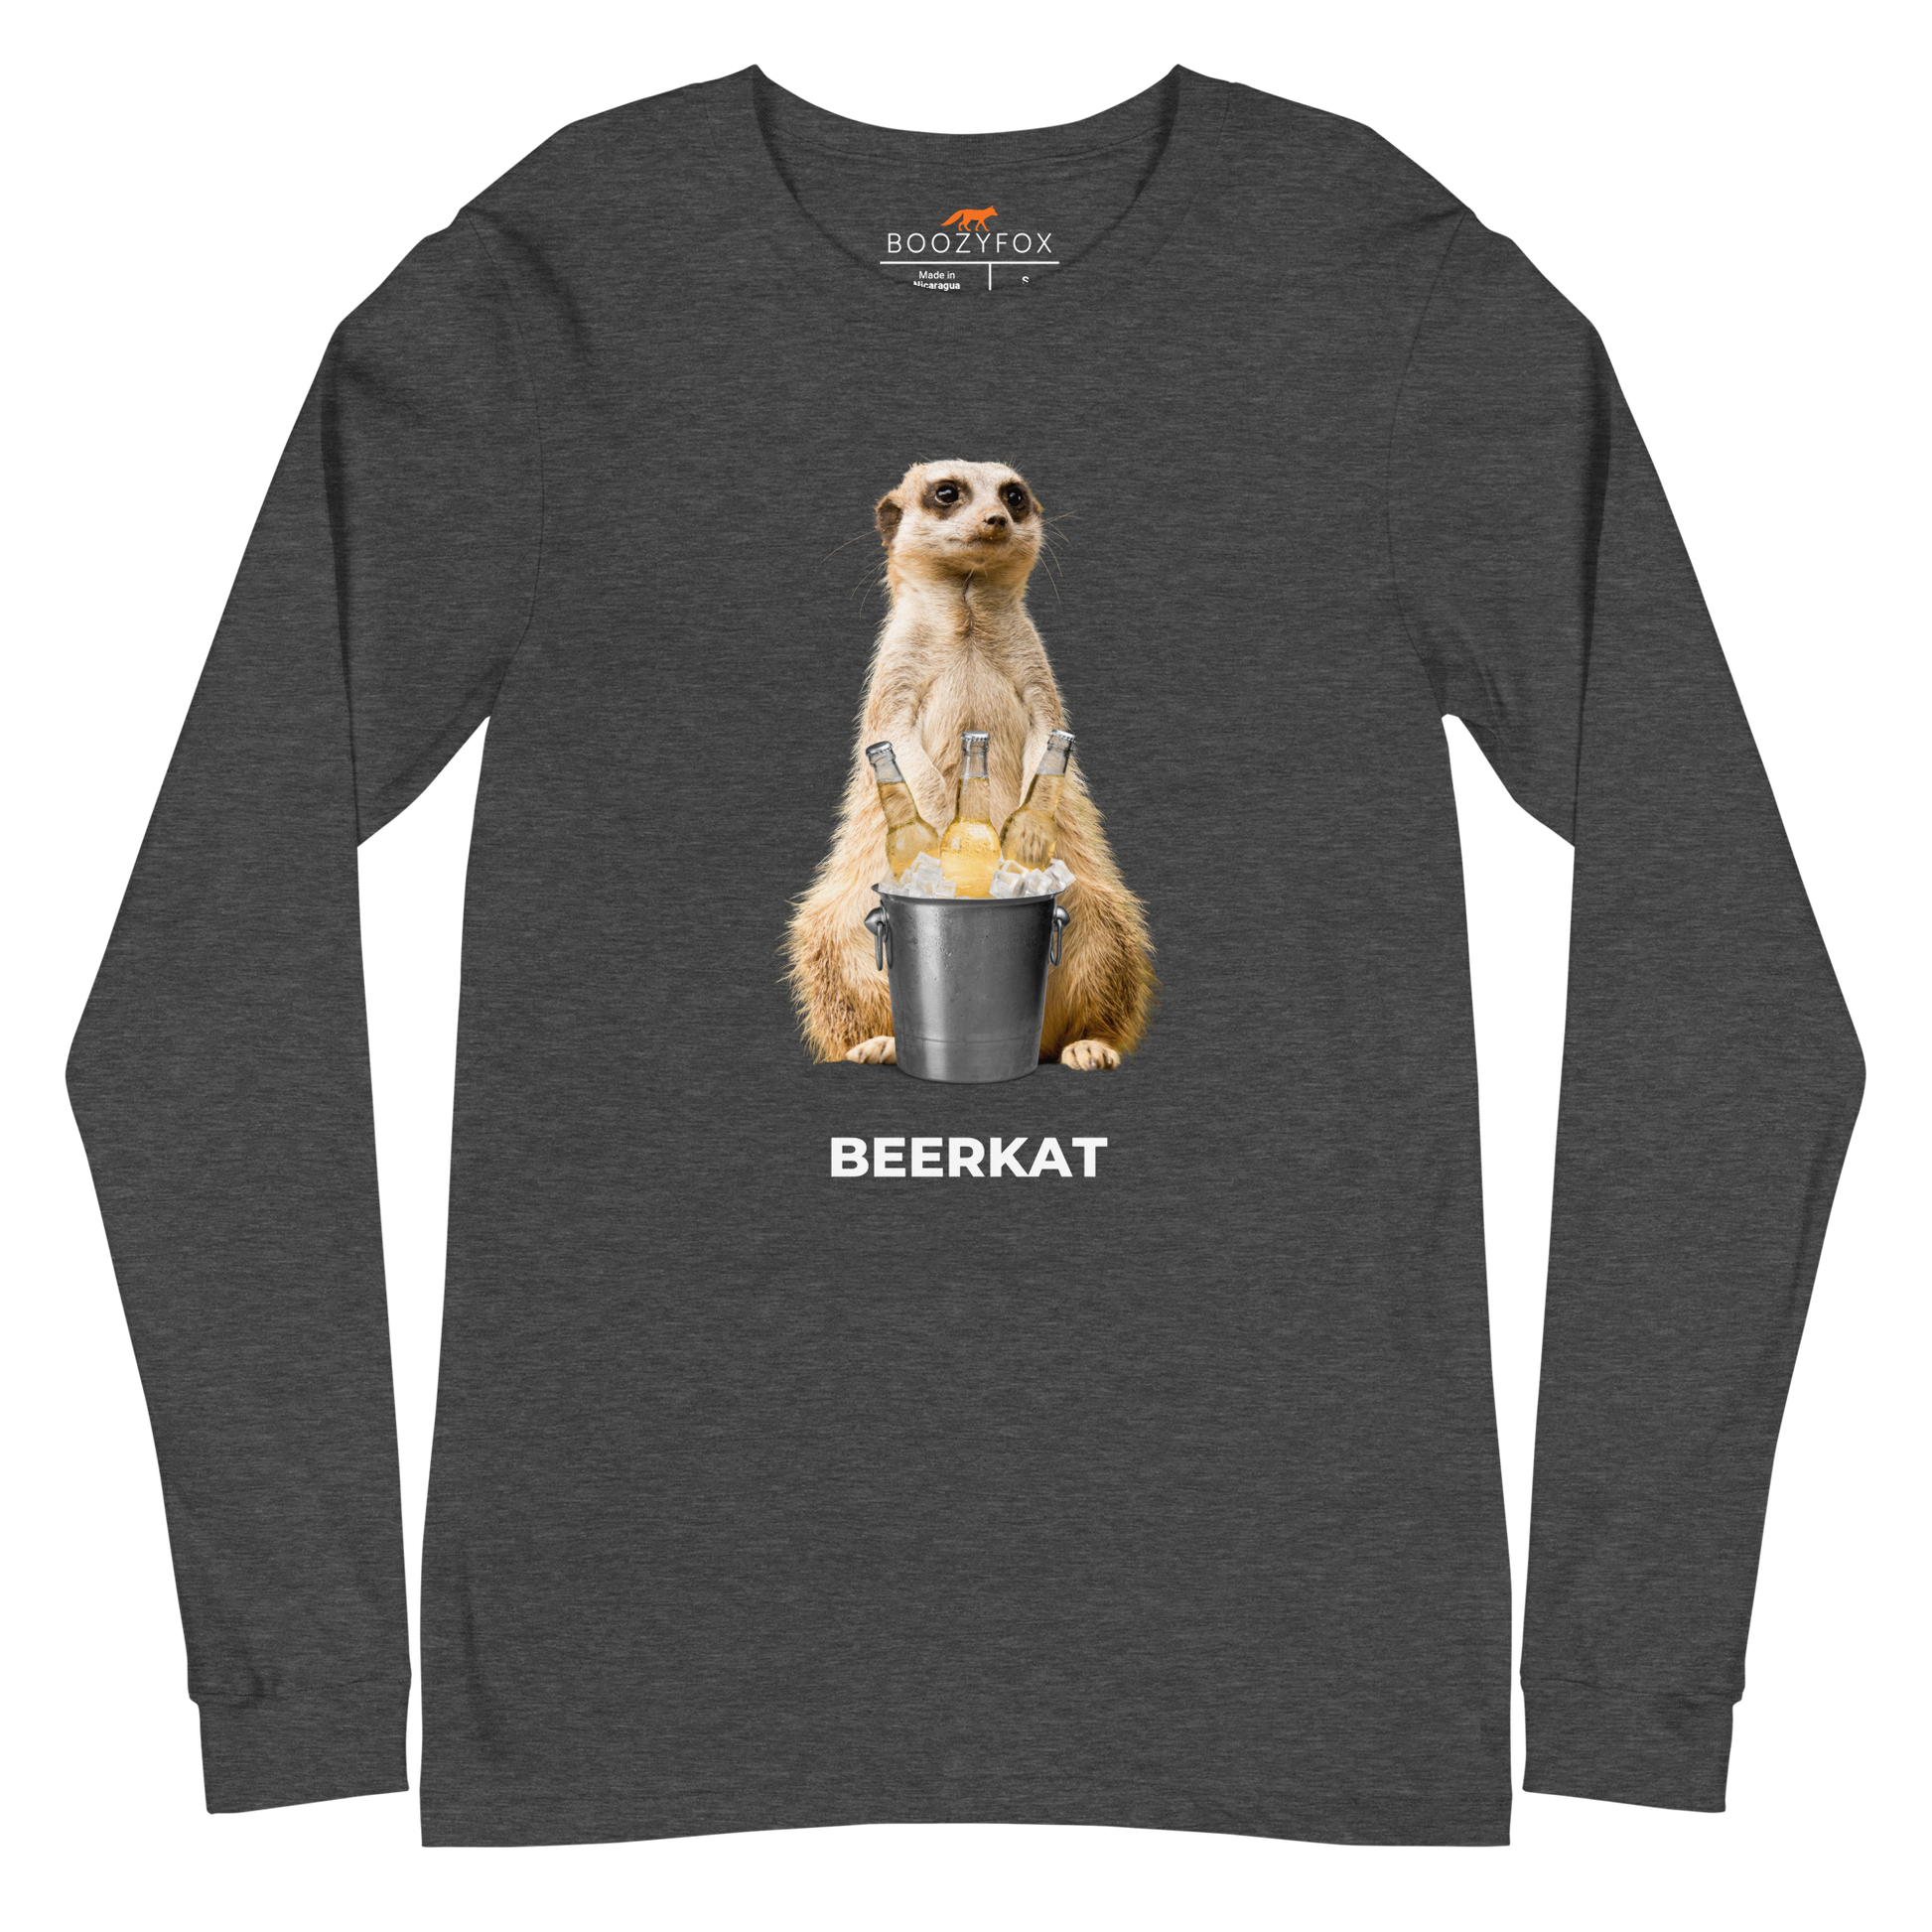 Dark Grey Heather Meerkat Long Sleeve Tee featuring a hilarious Beerkat graphic on the chest - Funny Meerkat Long Sleeve Graphic Tees - Boozy Fox